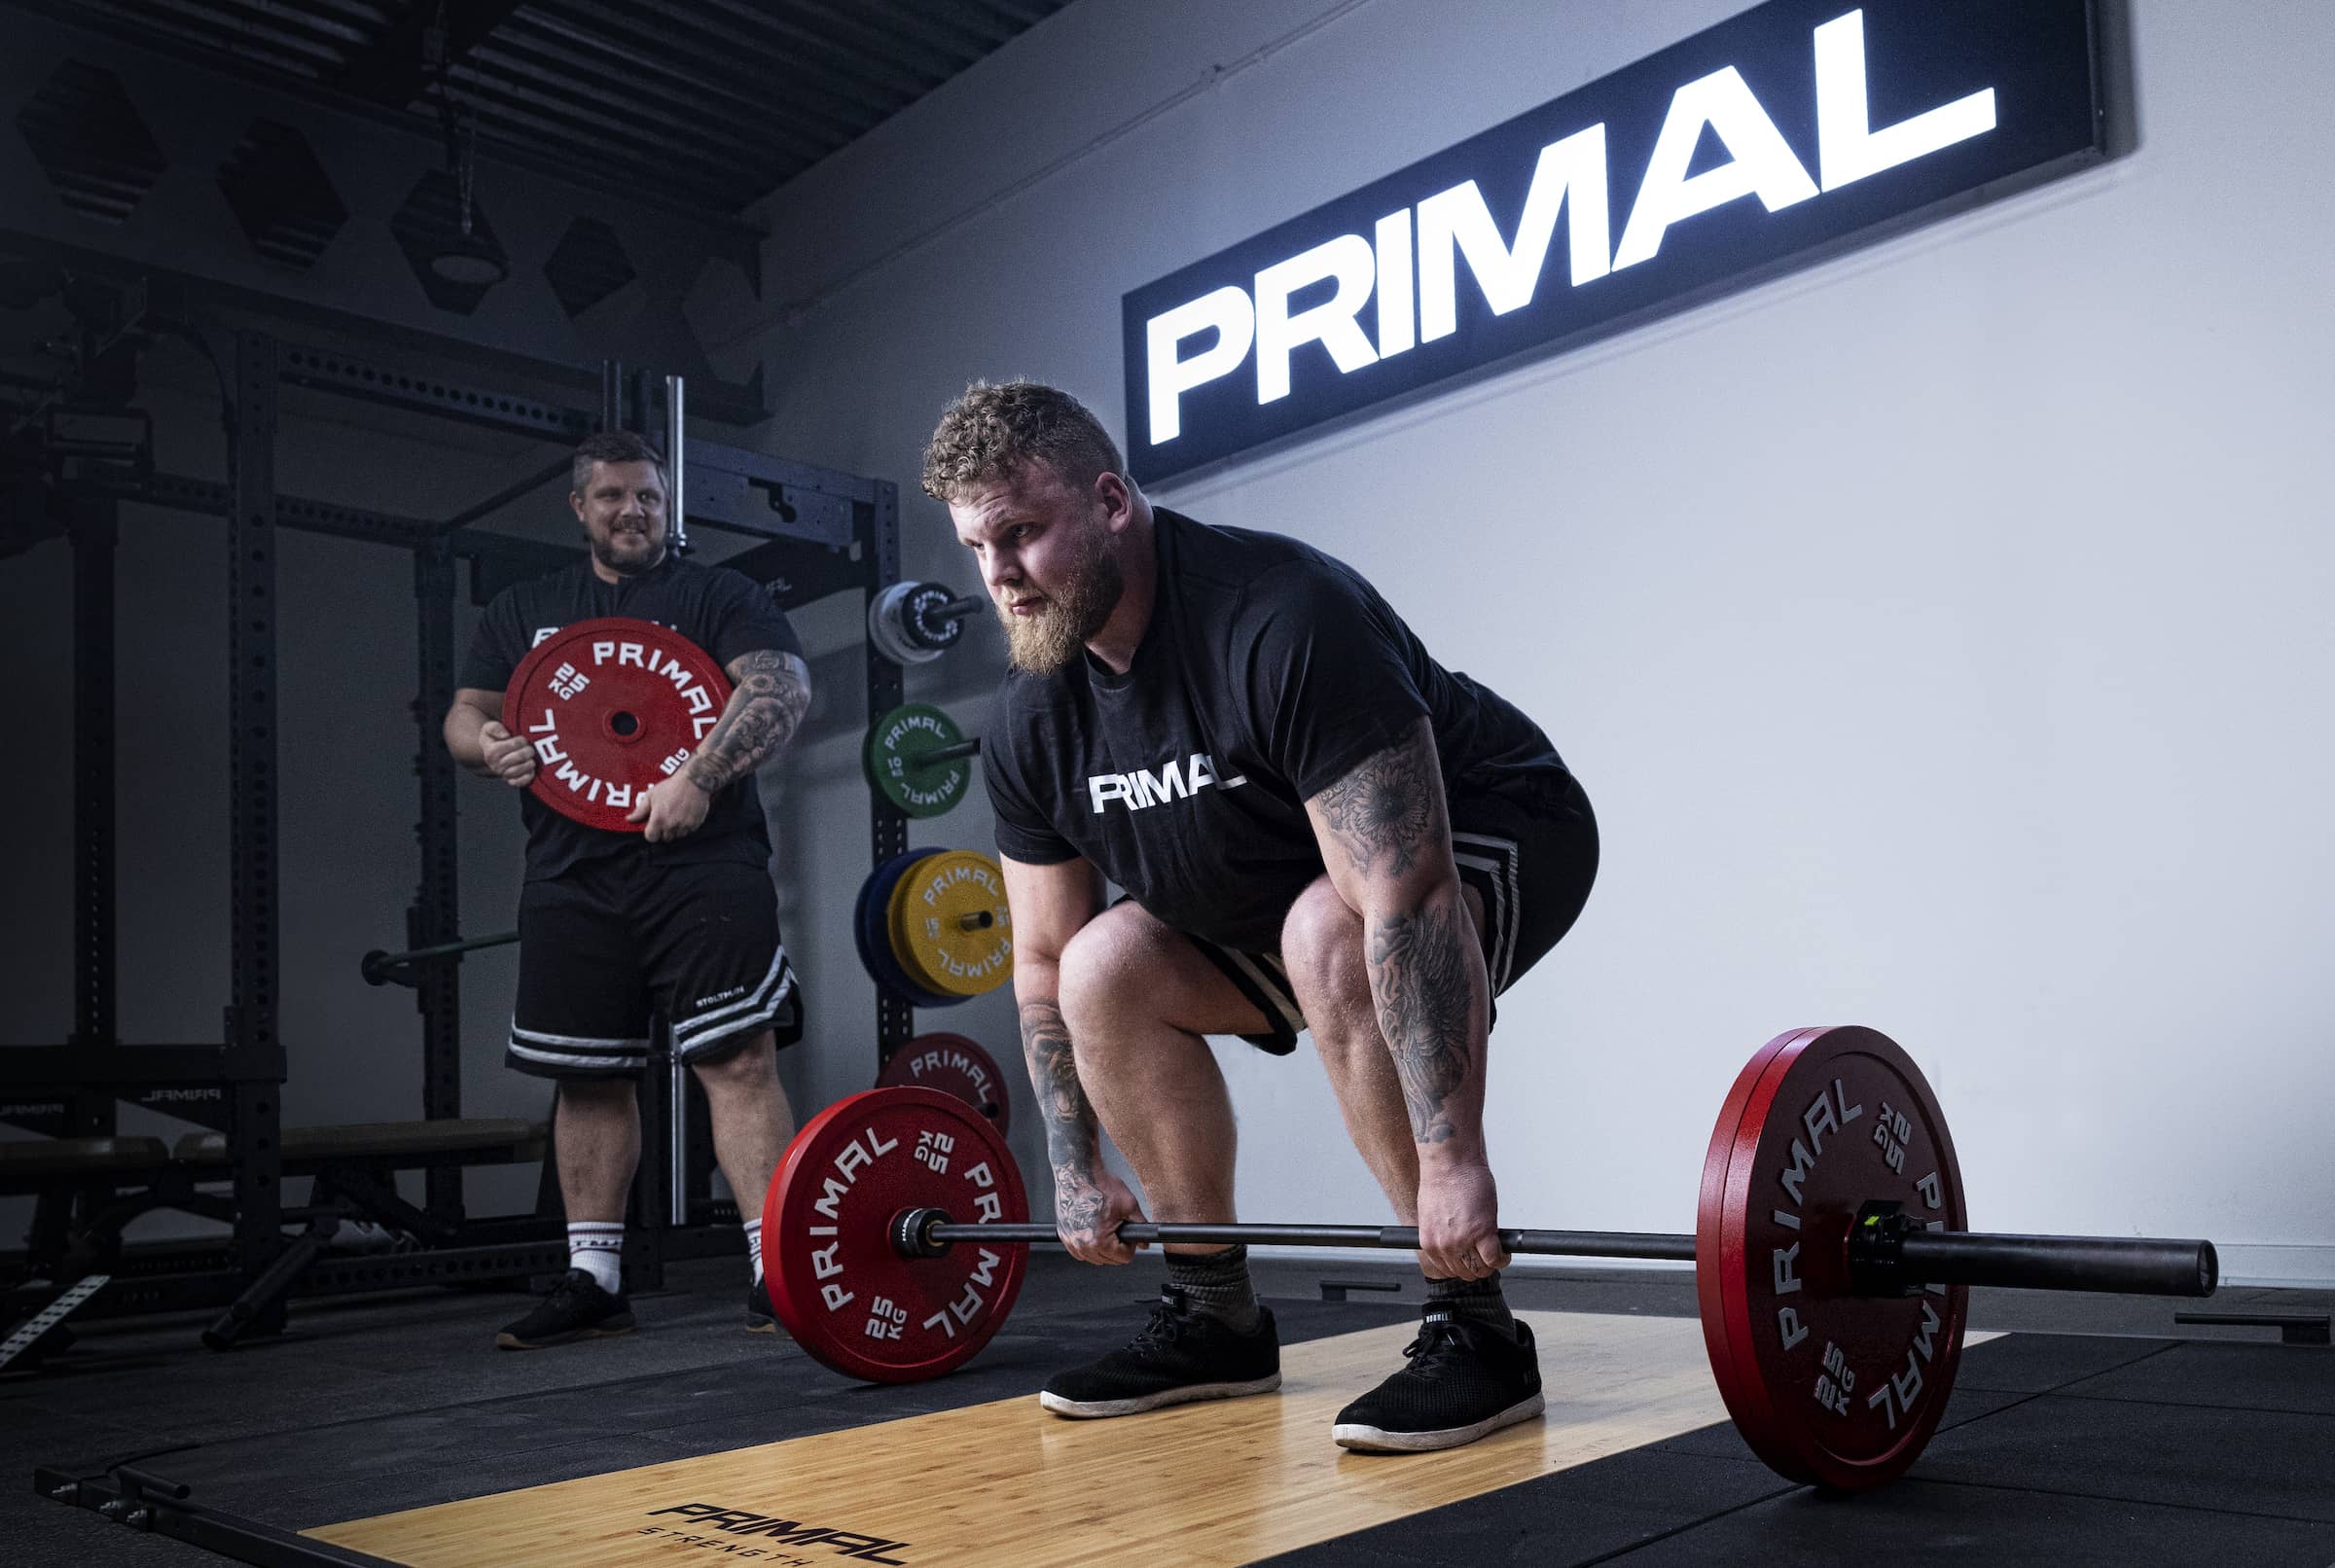 World’s strongest brothers sign with primal